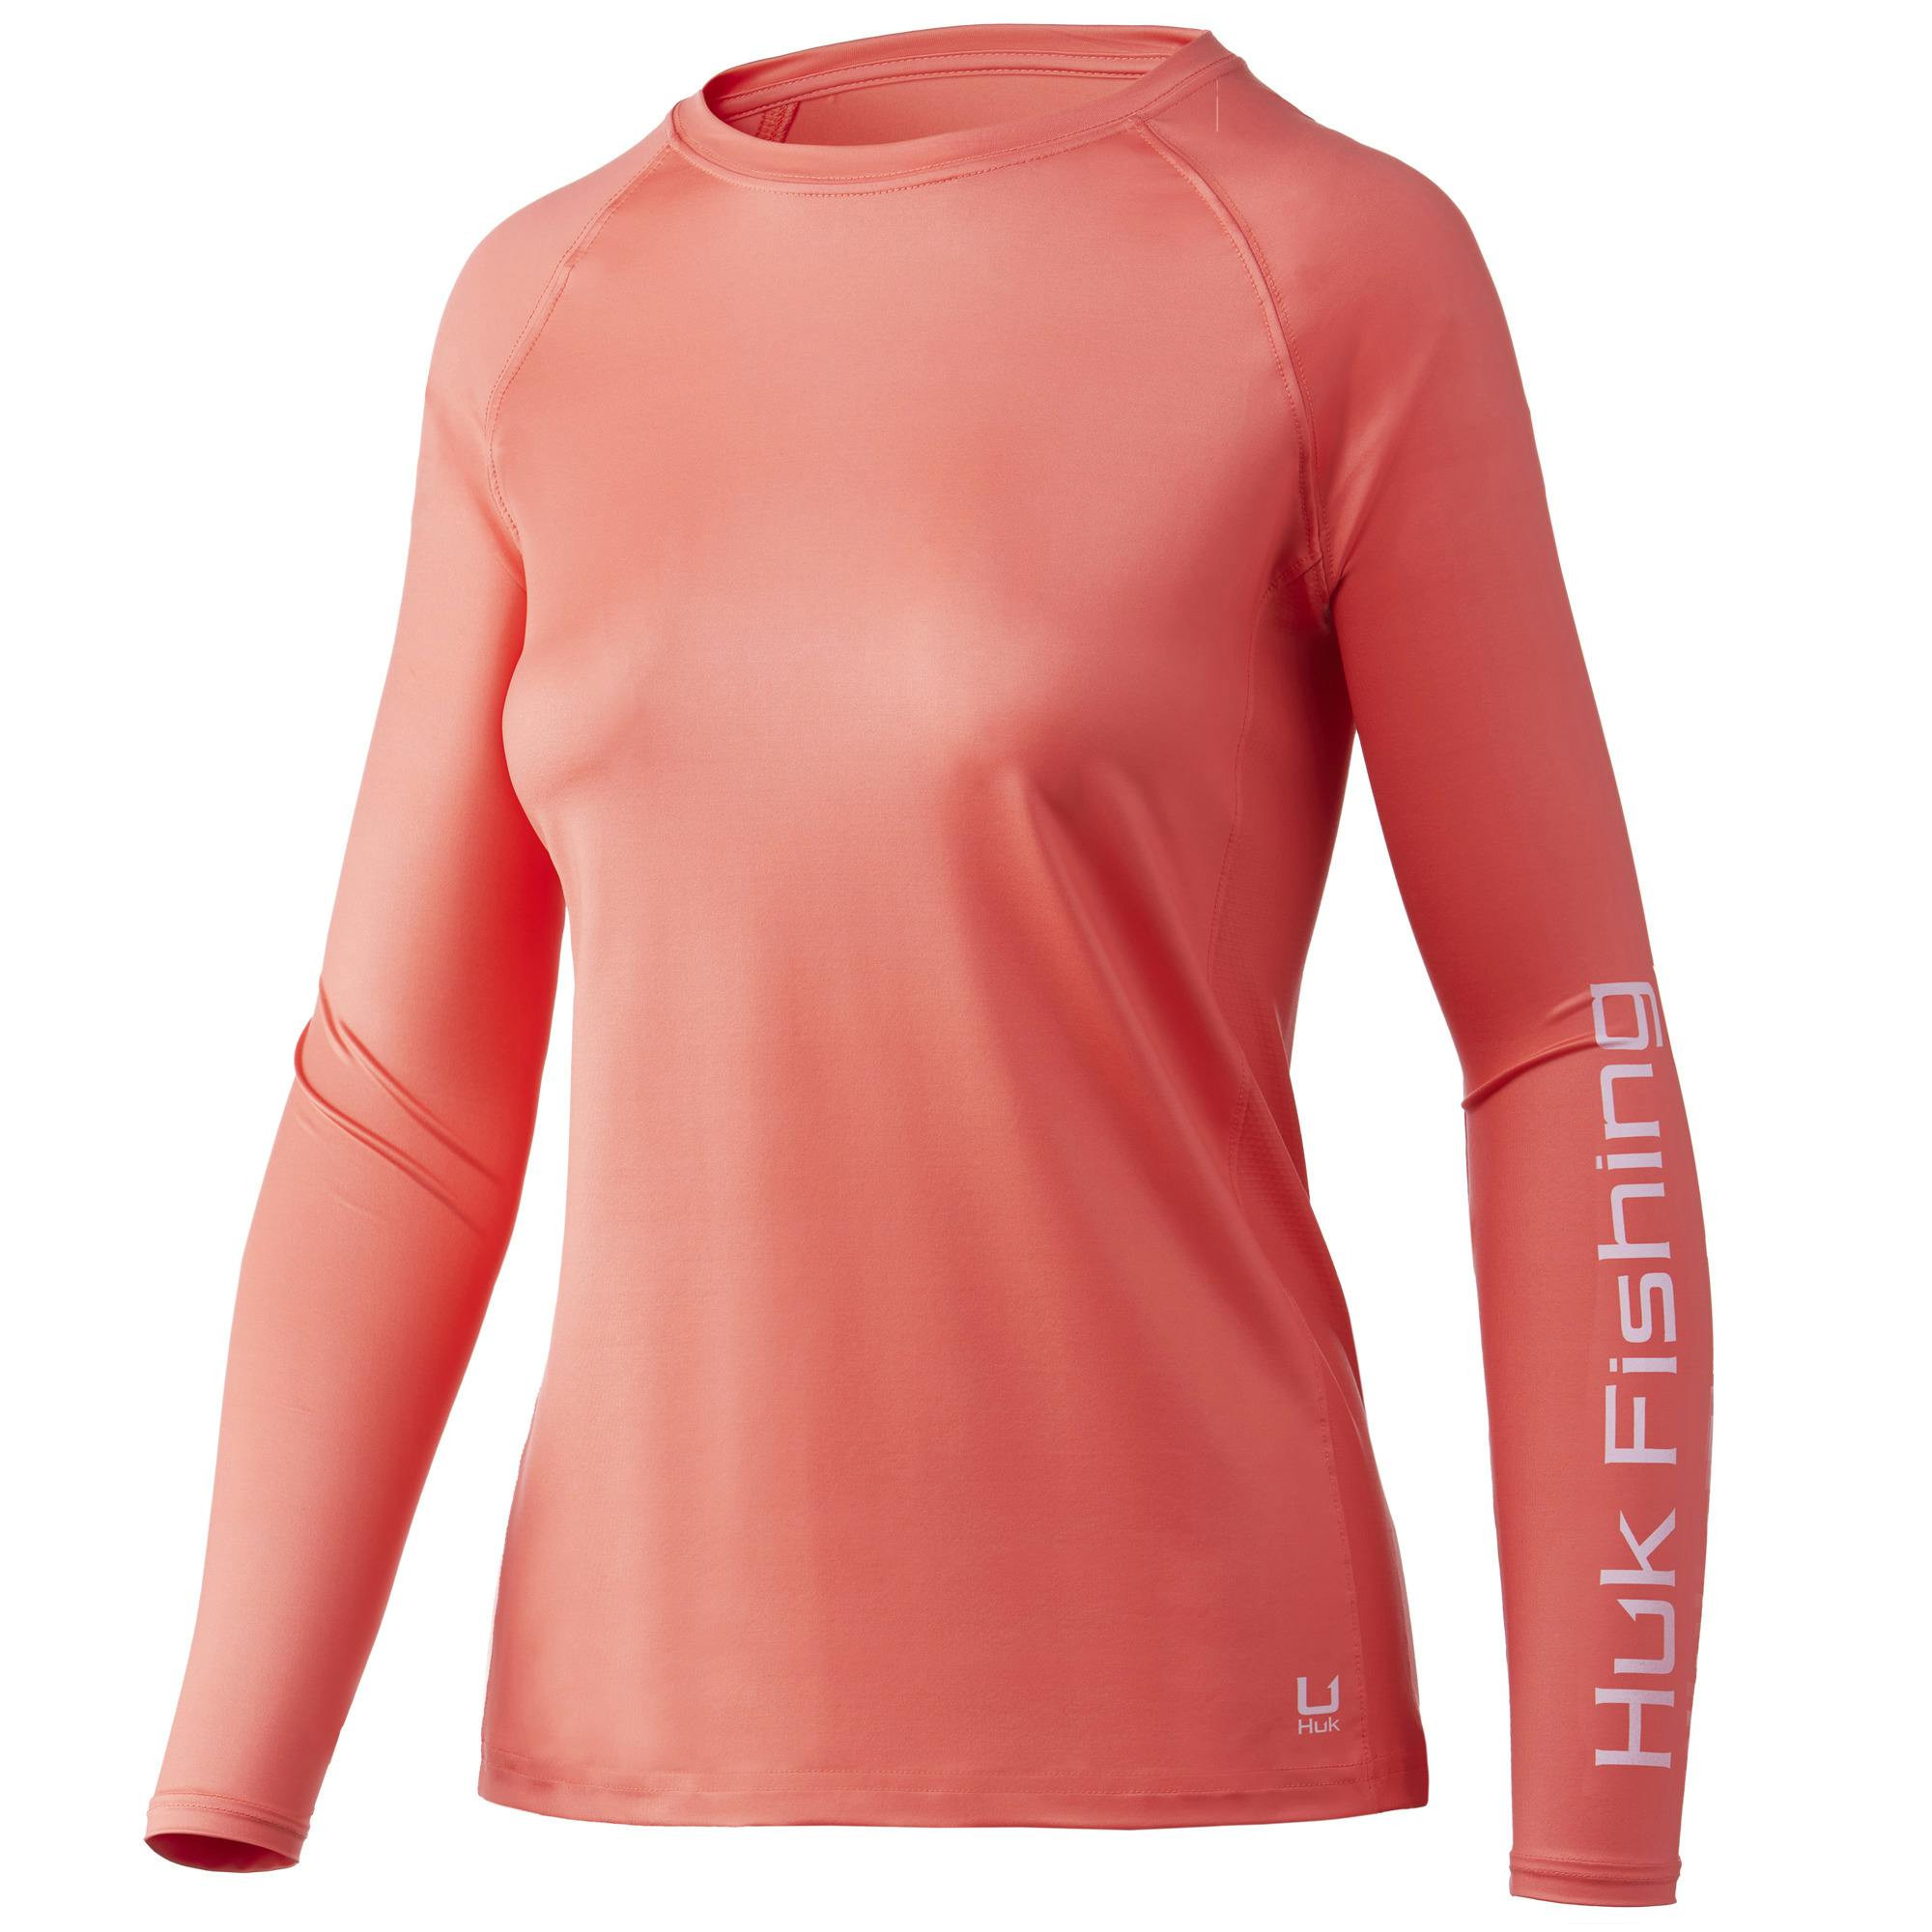 Huk Pursuit Long Sleeve Performance Shirt (Women's) Front - Hot Coral